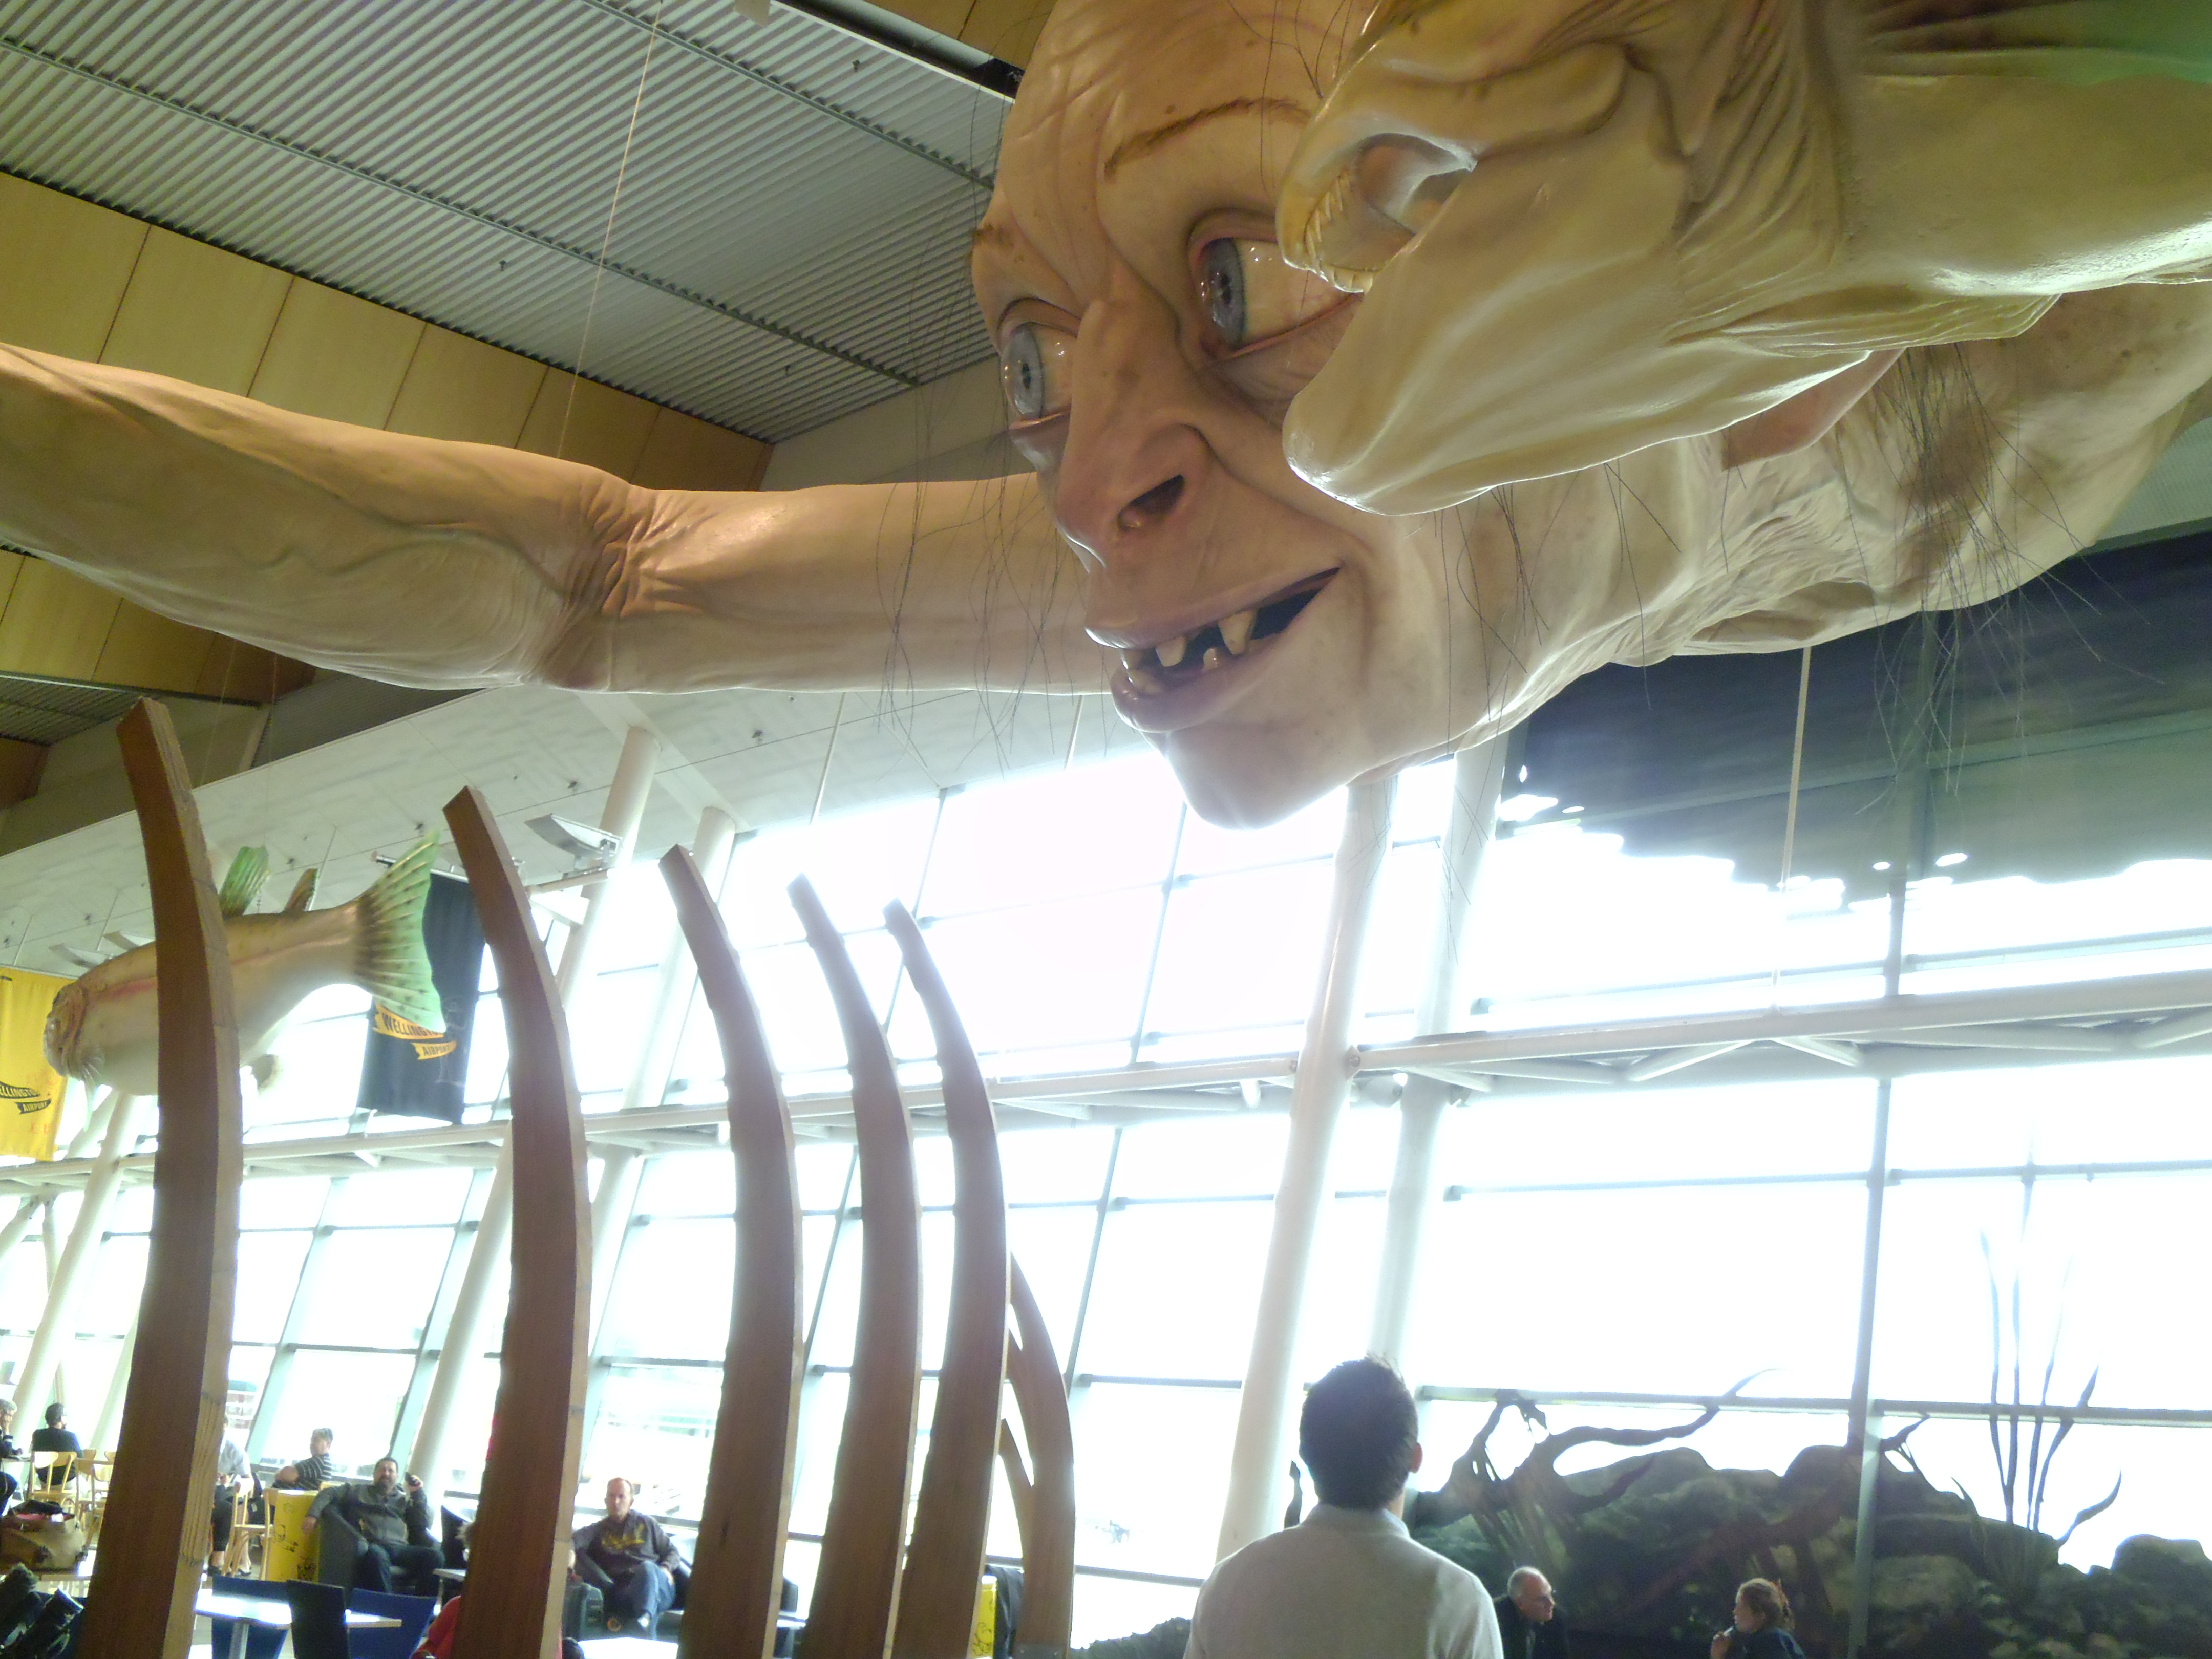 Lord of the Rings' comes to life with a Gollum statue at Wellington  International Airport 